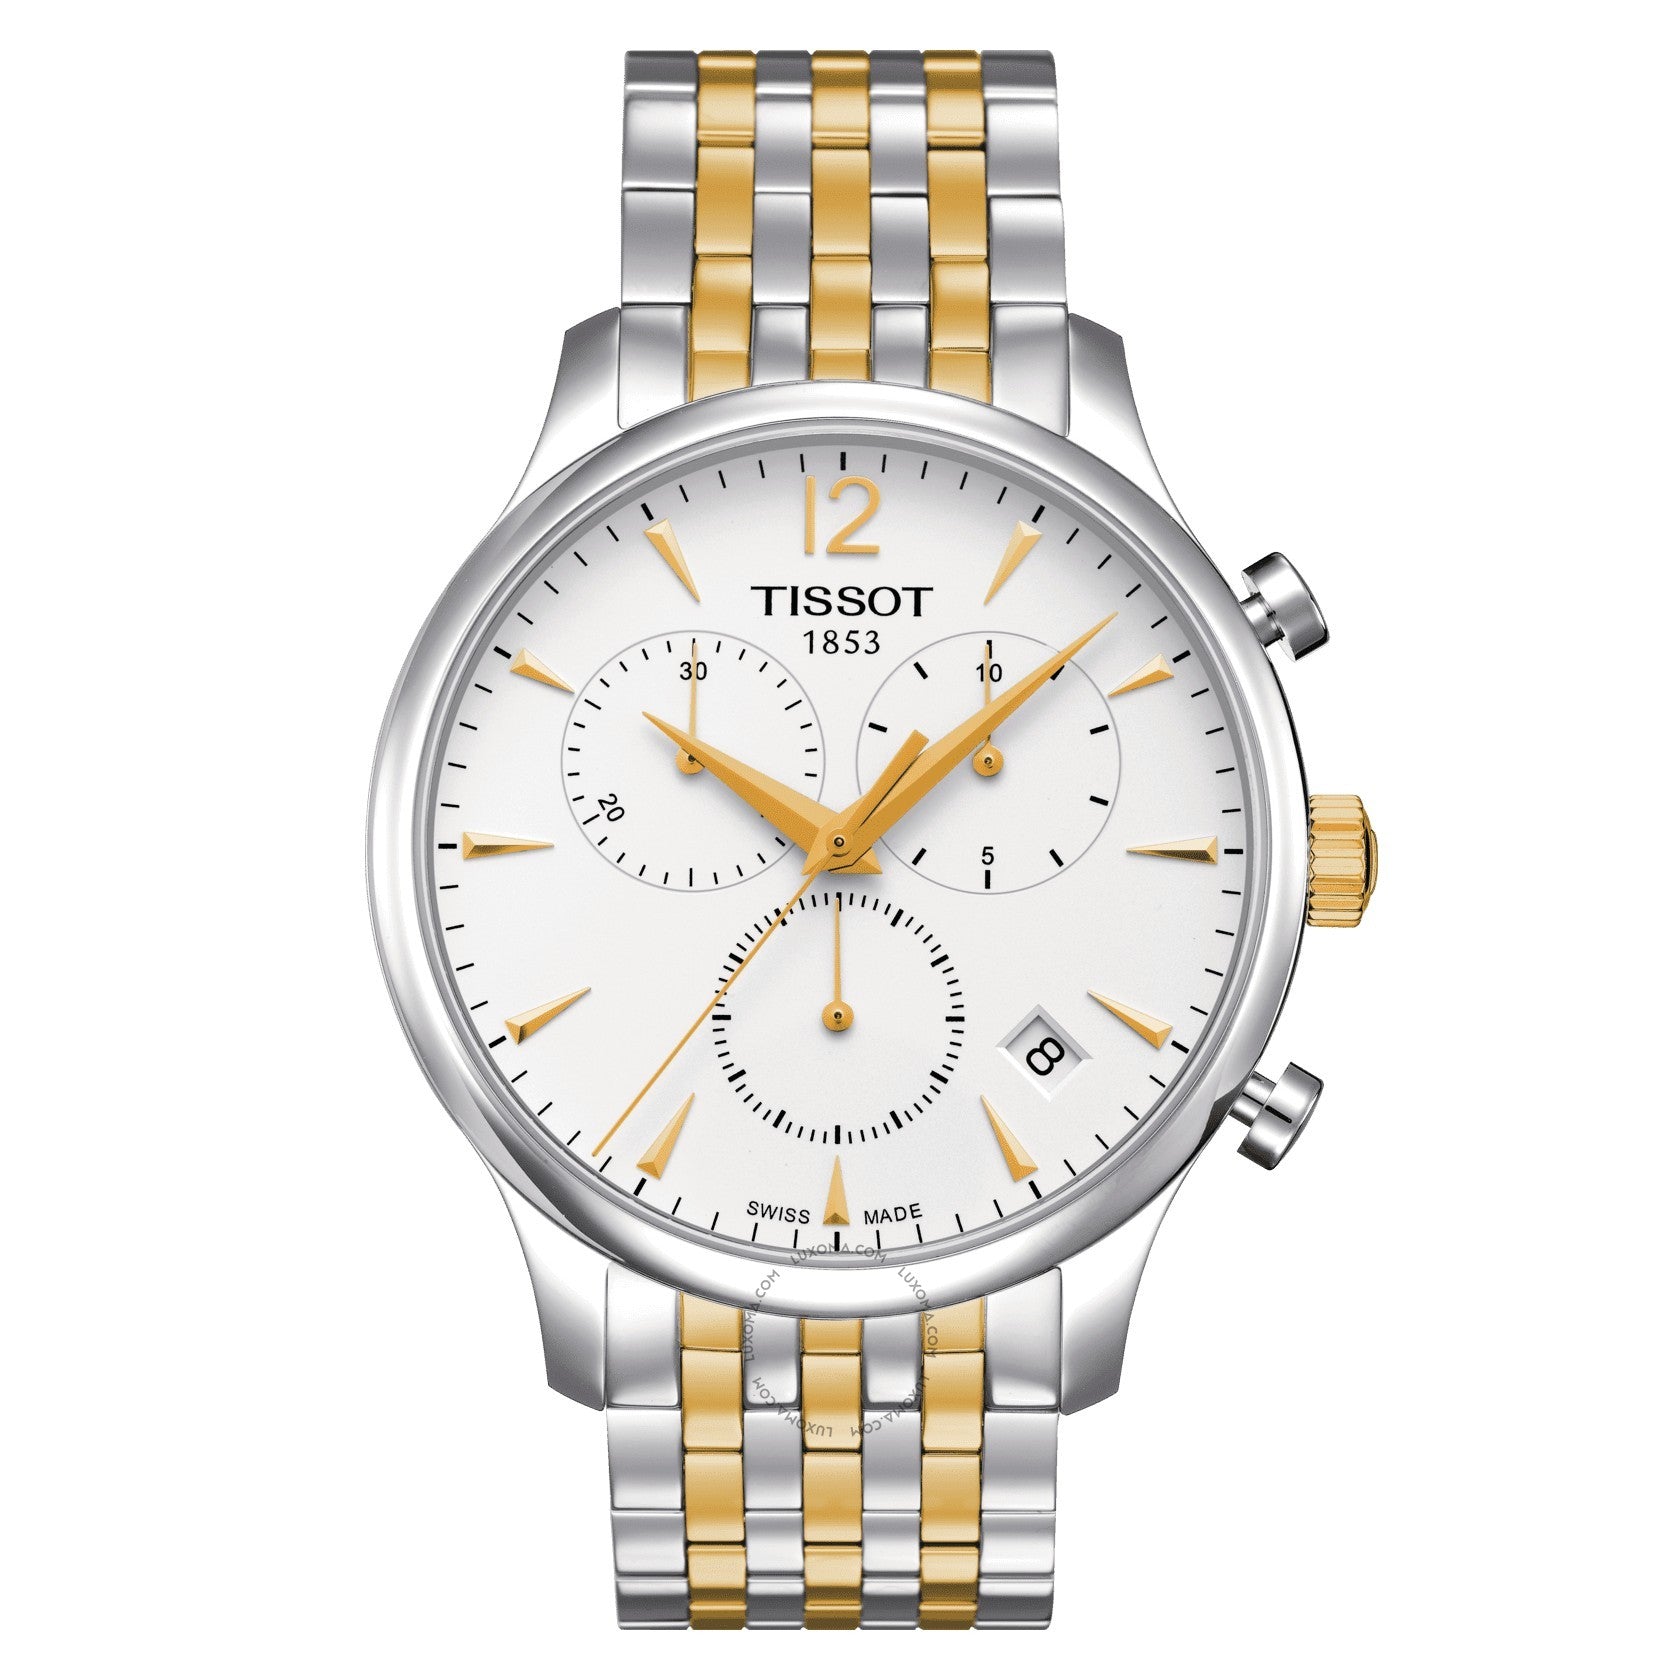 Tissot T-Classic Collection Chronograph White Dial Men's Watch T063.617.22.037.00